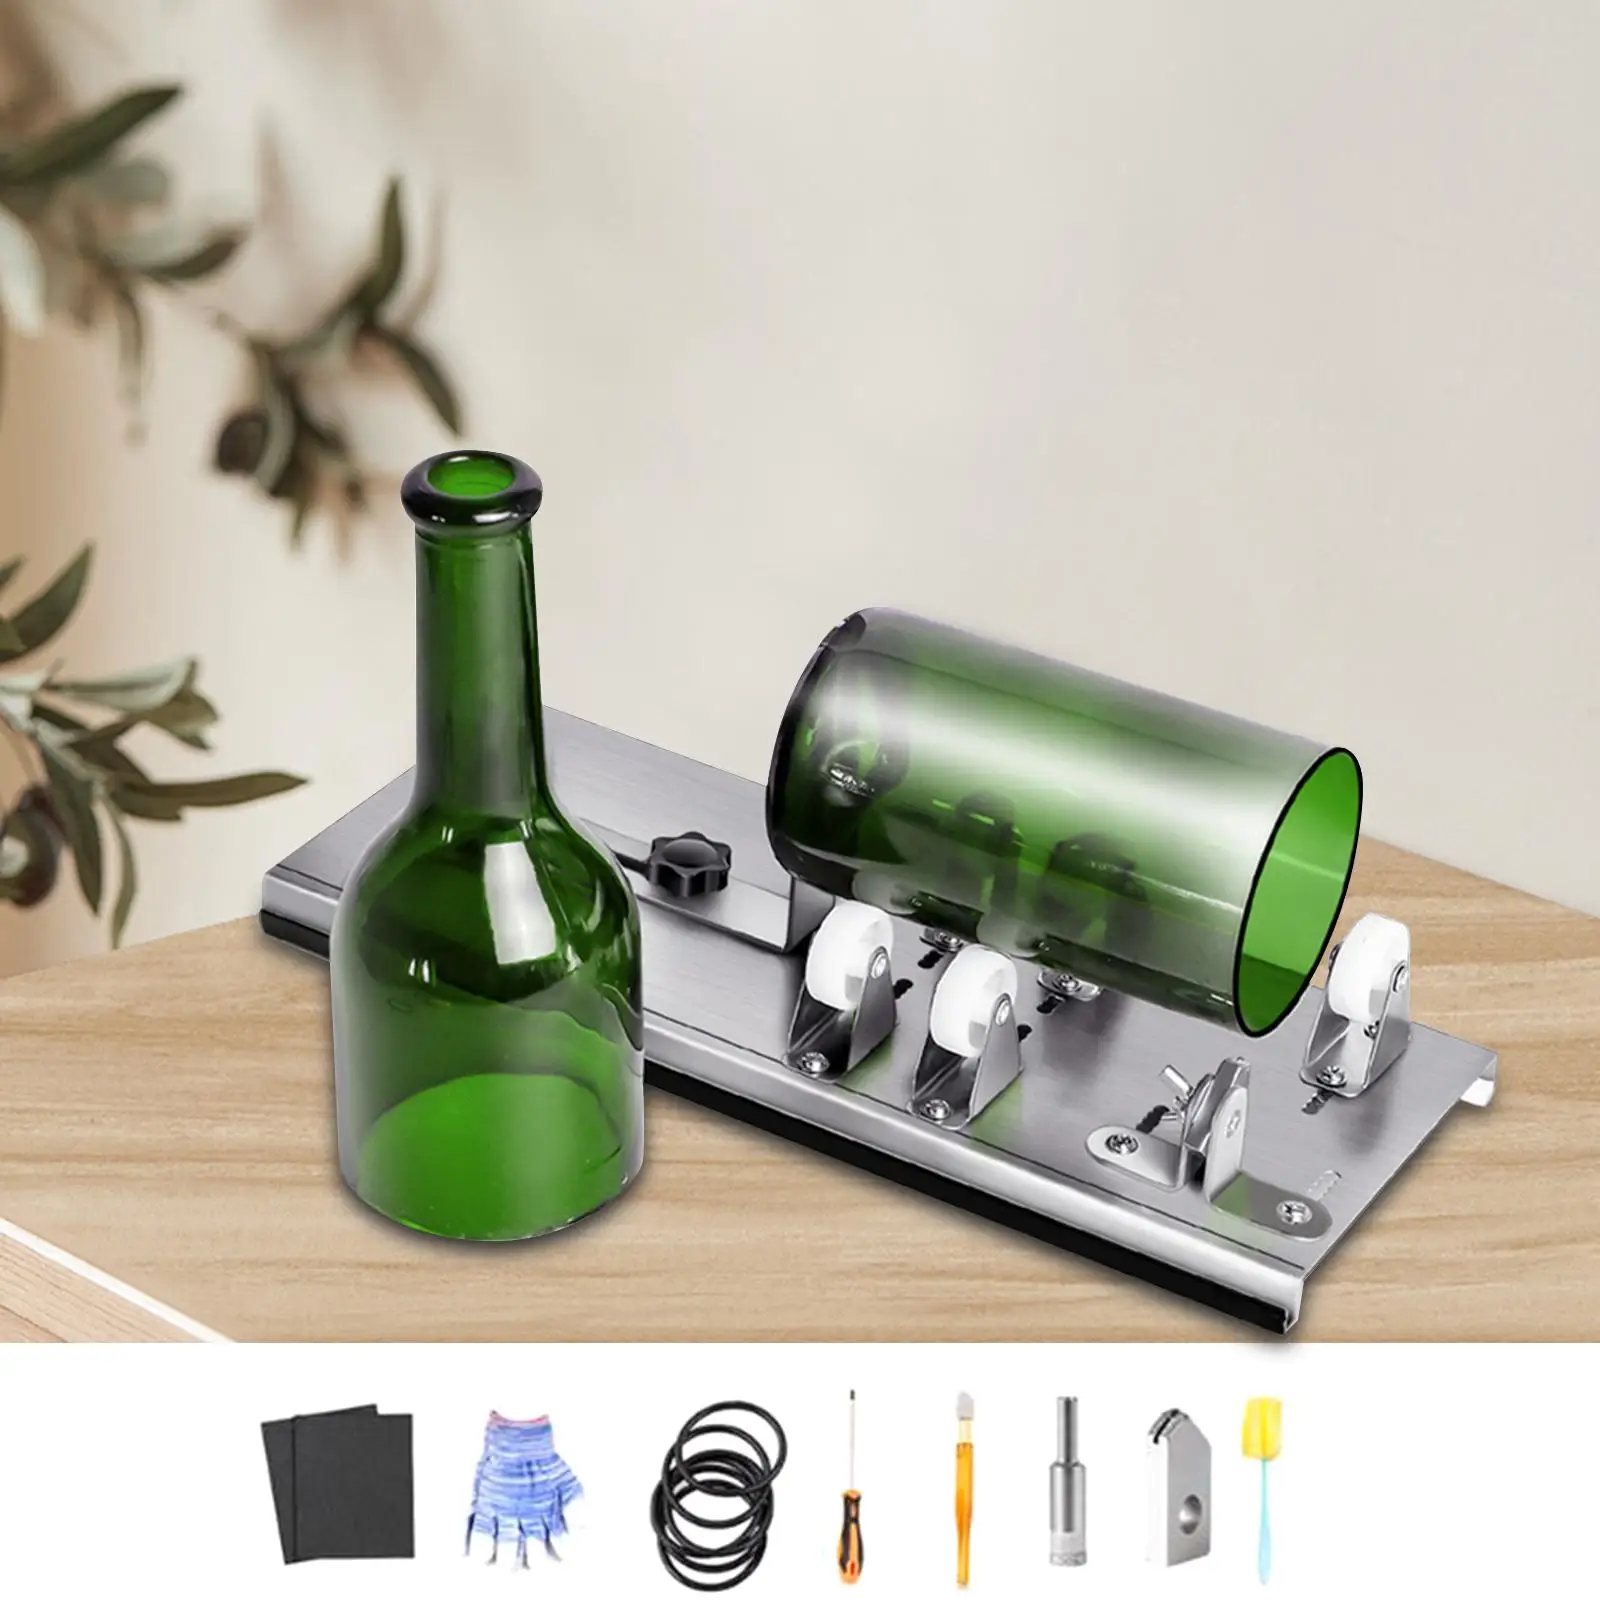 Glass Bottle Cutter Crafts Electric Durable Portable Cutting Machine for DIY Flowerpot Pen Holders Vases Candle Holders Decor